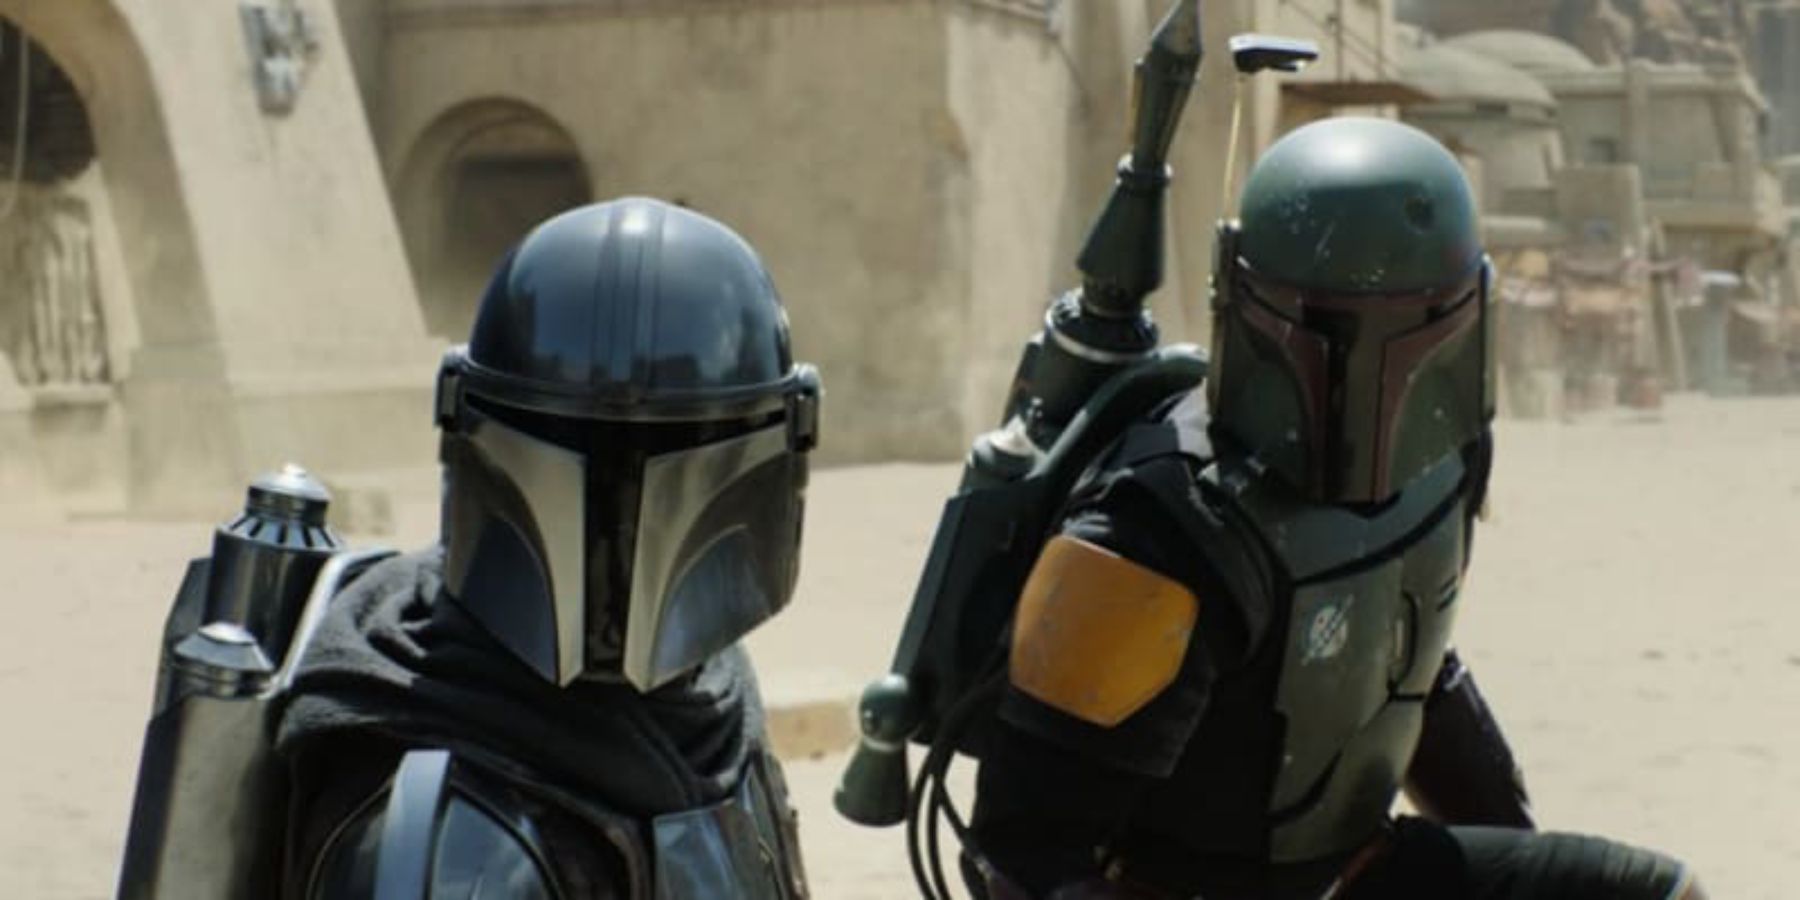 The Mandalorian fighting in the Book of Boba Fett episode 7finale